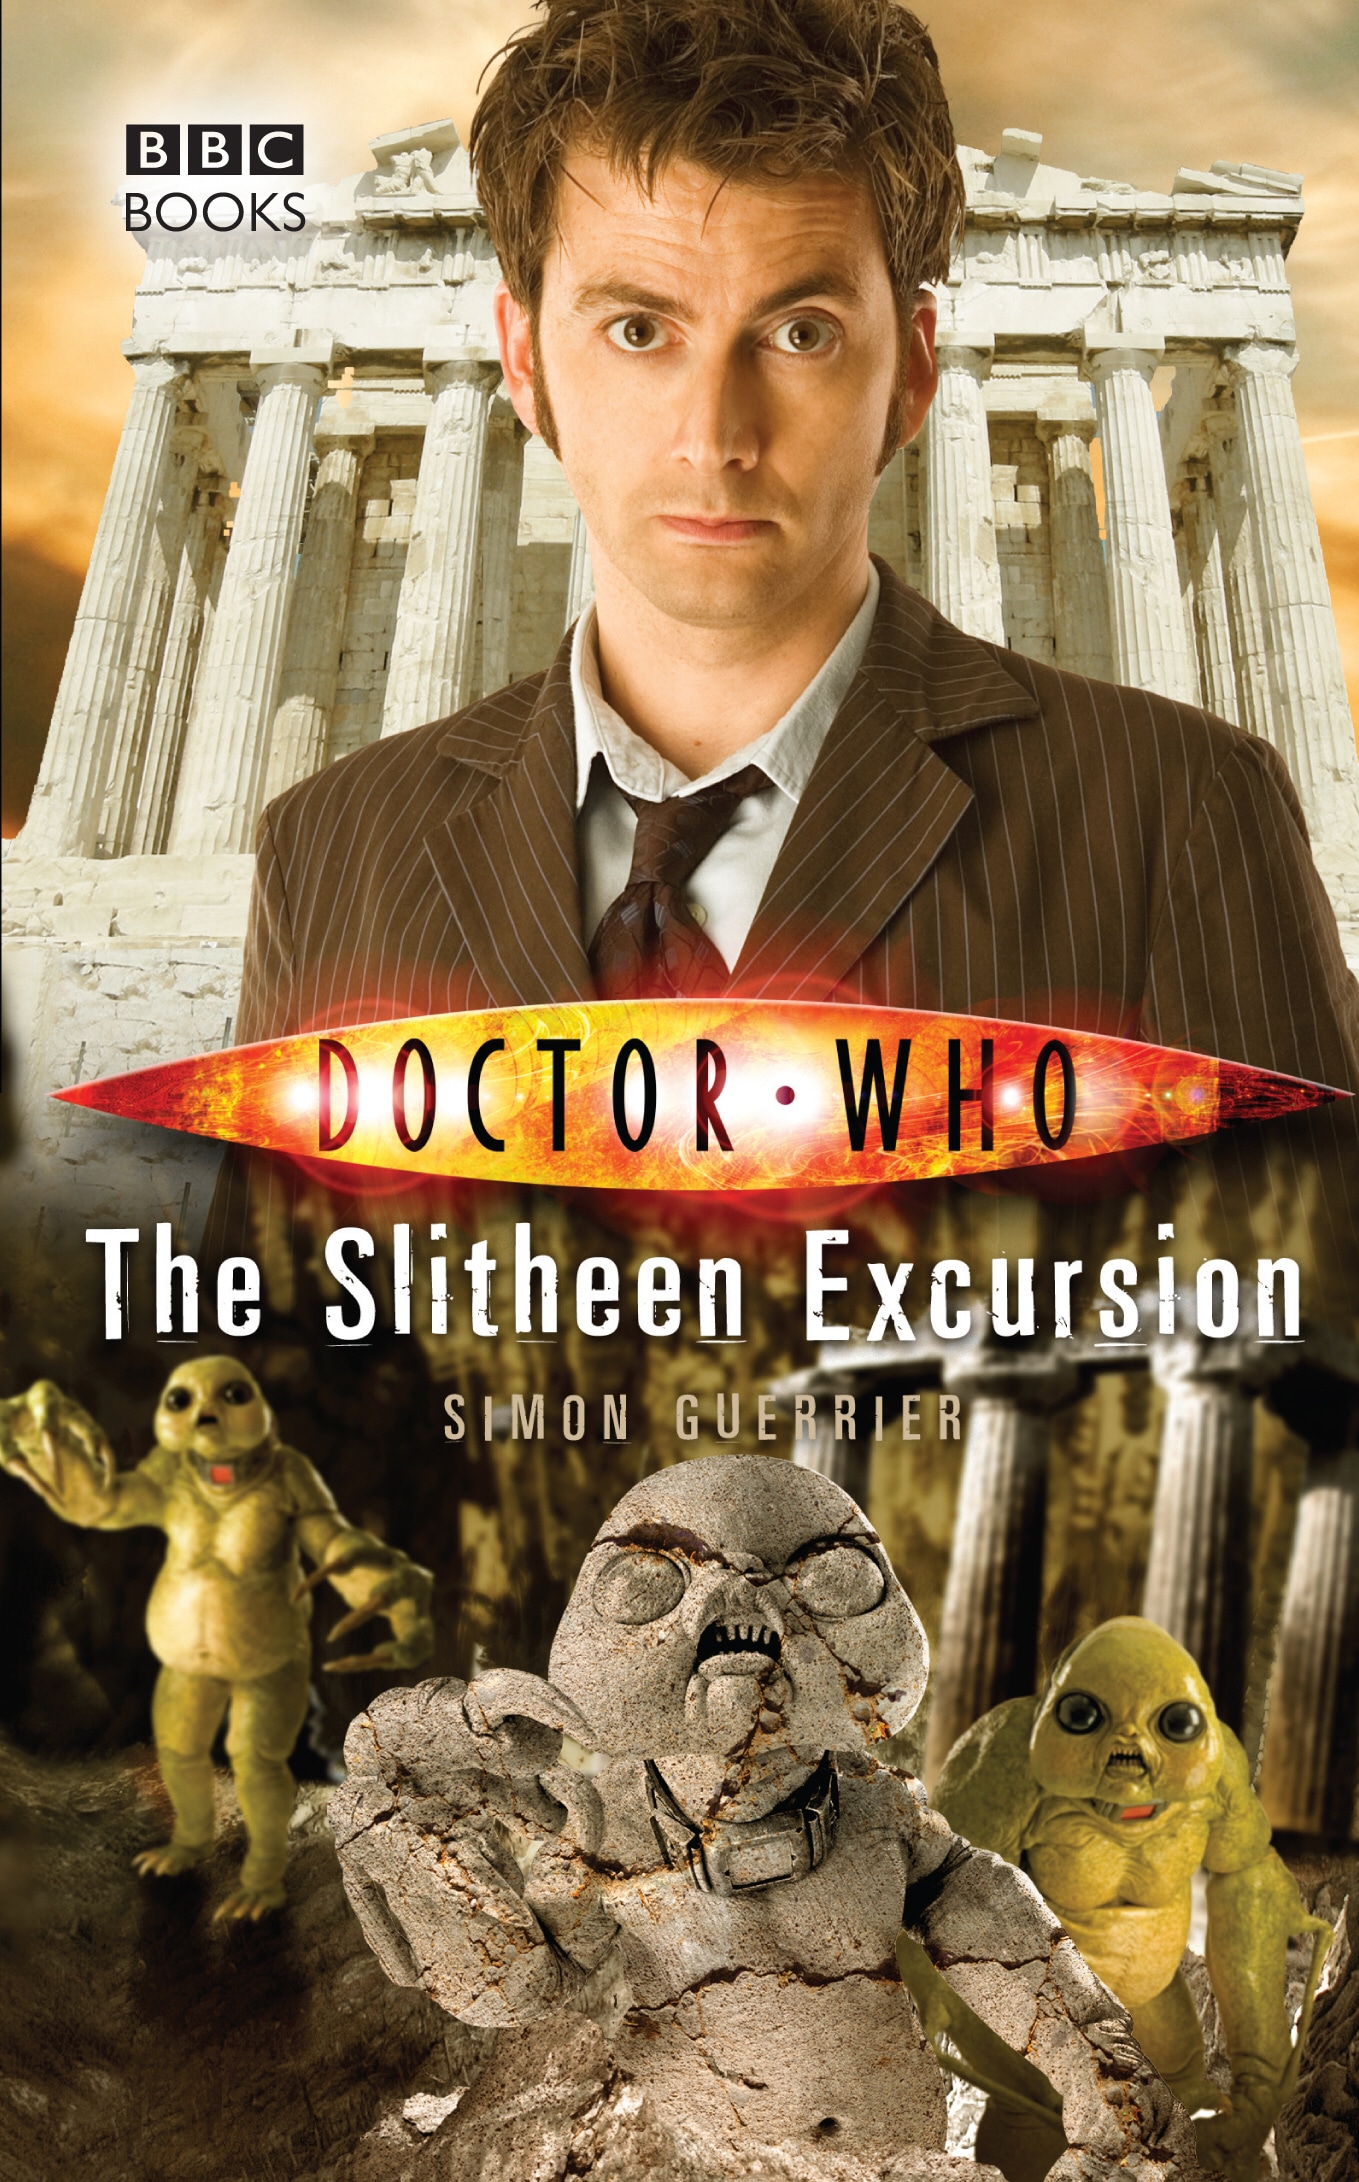 Book “Doctor Who: The Slitheen Excursion” by Simon Guerrier — April 25, 2013